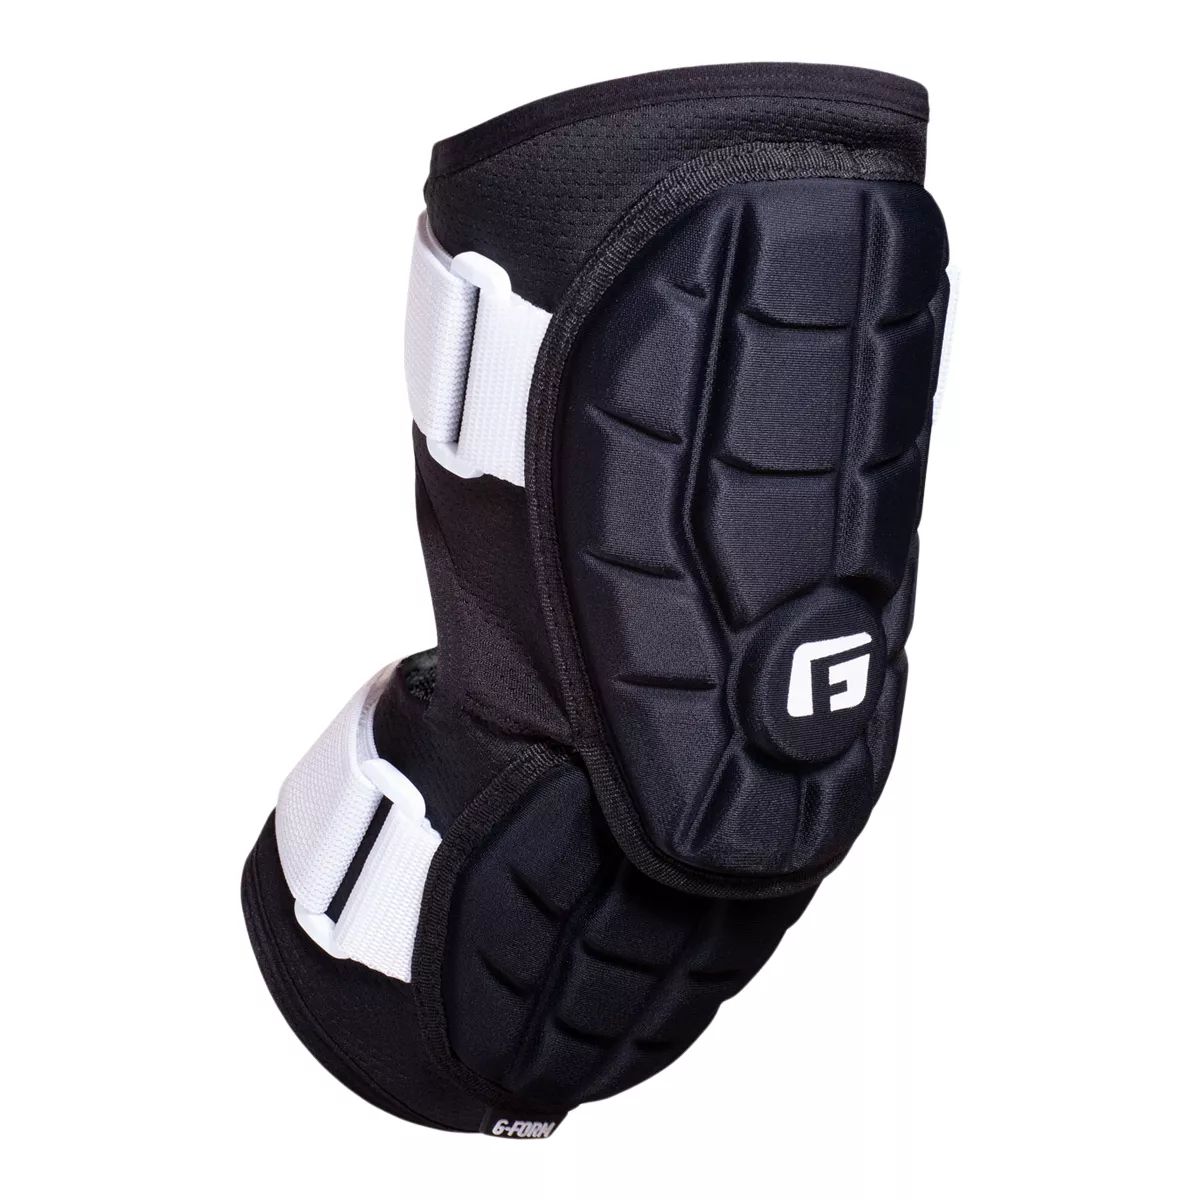 G-Form Elite 2 Youth Baseball Elbow Guards